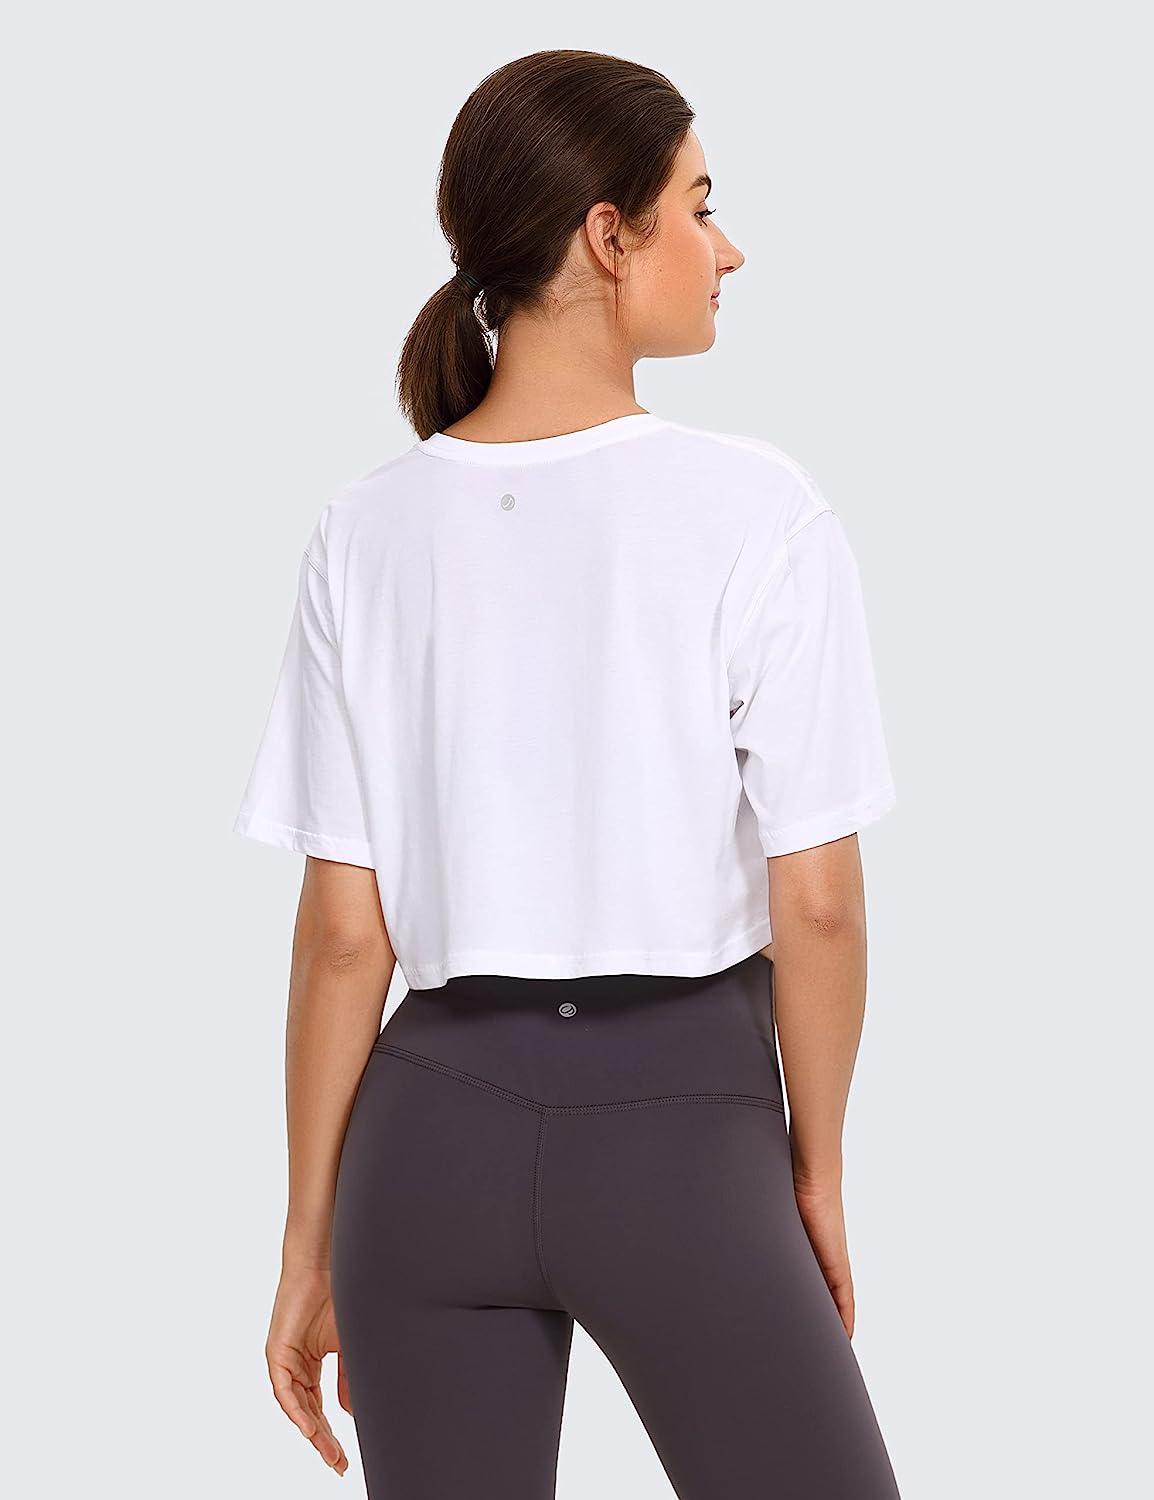 CRZ YOGA Women's Long Sleeve Crop Top Quick Dry Cropped